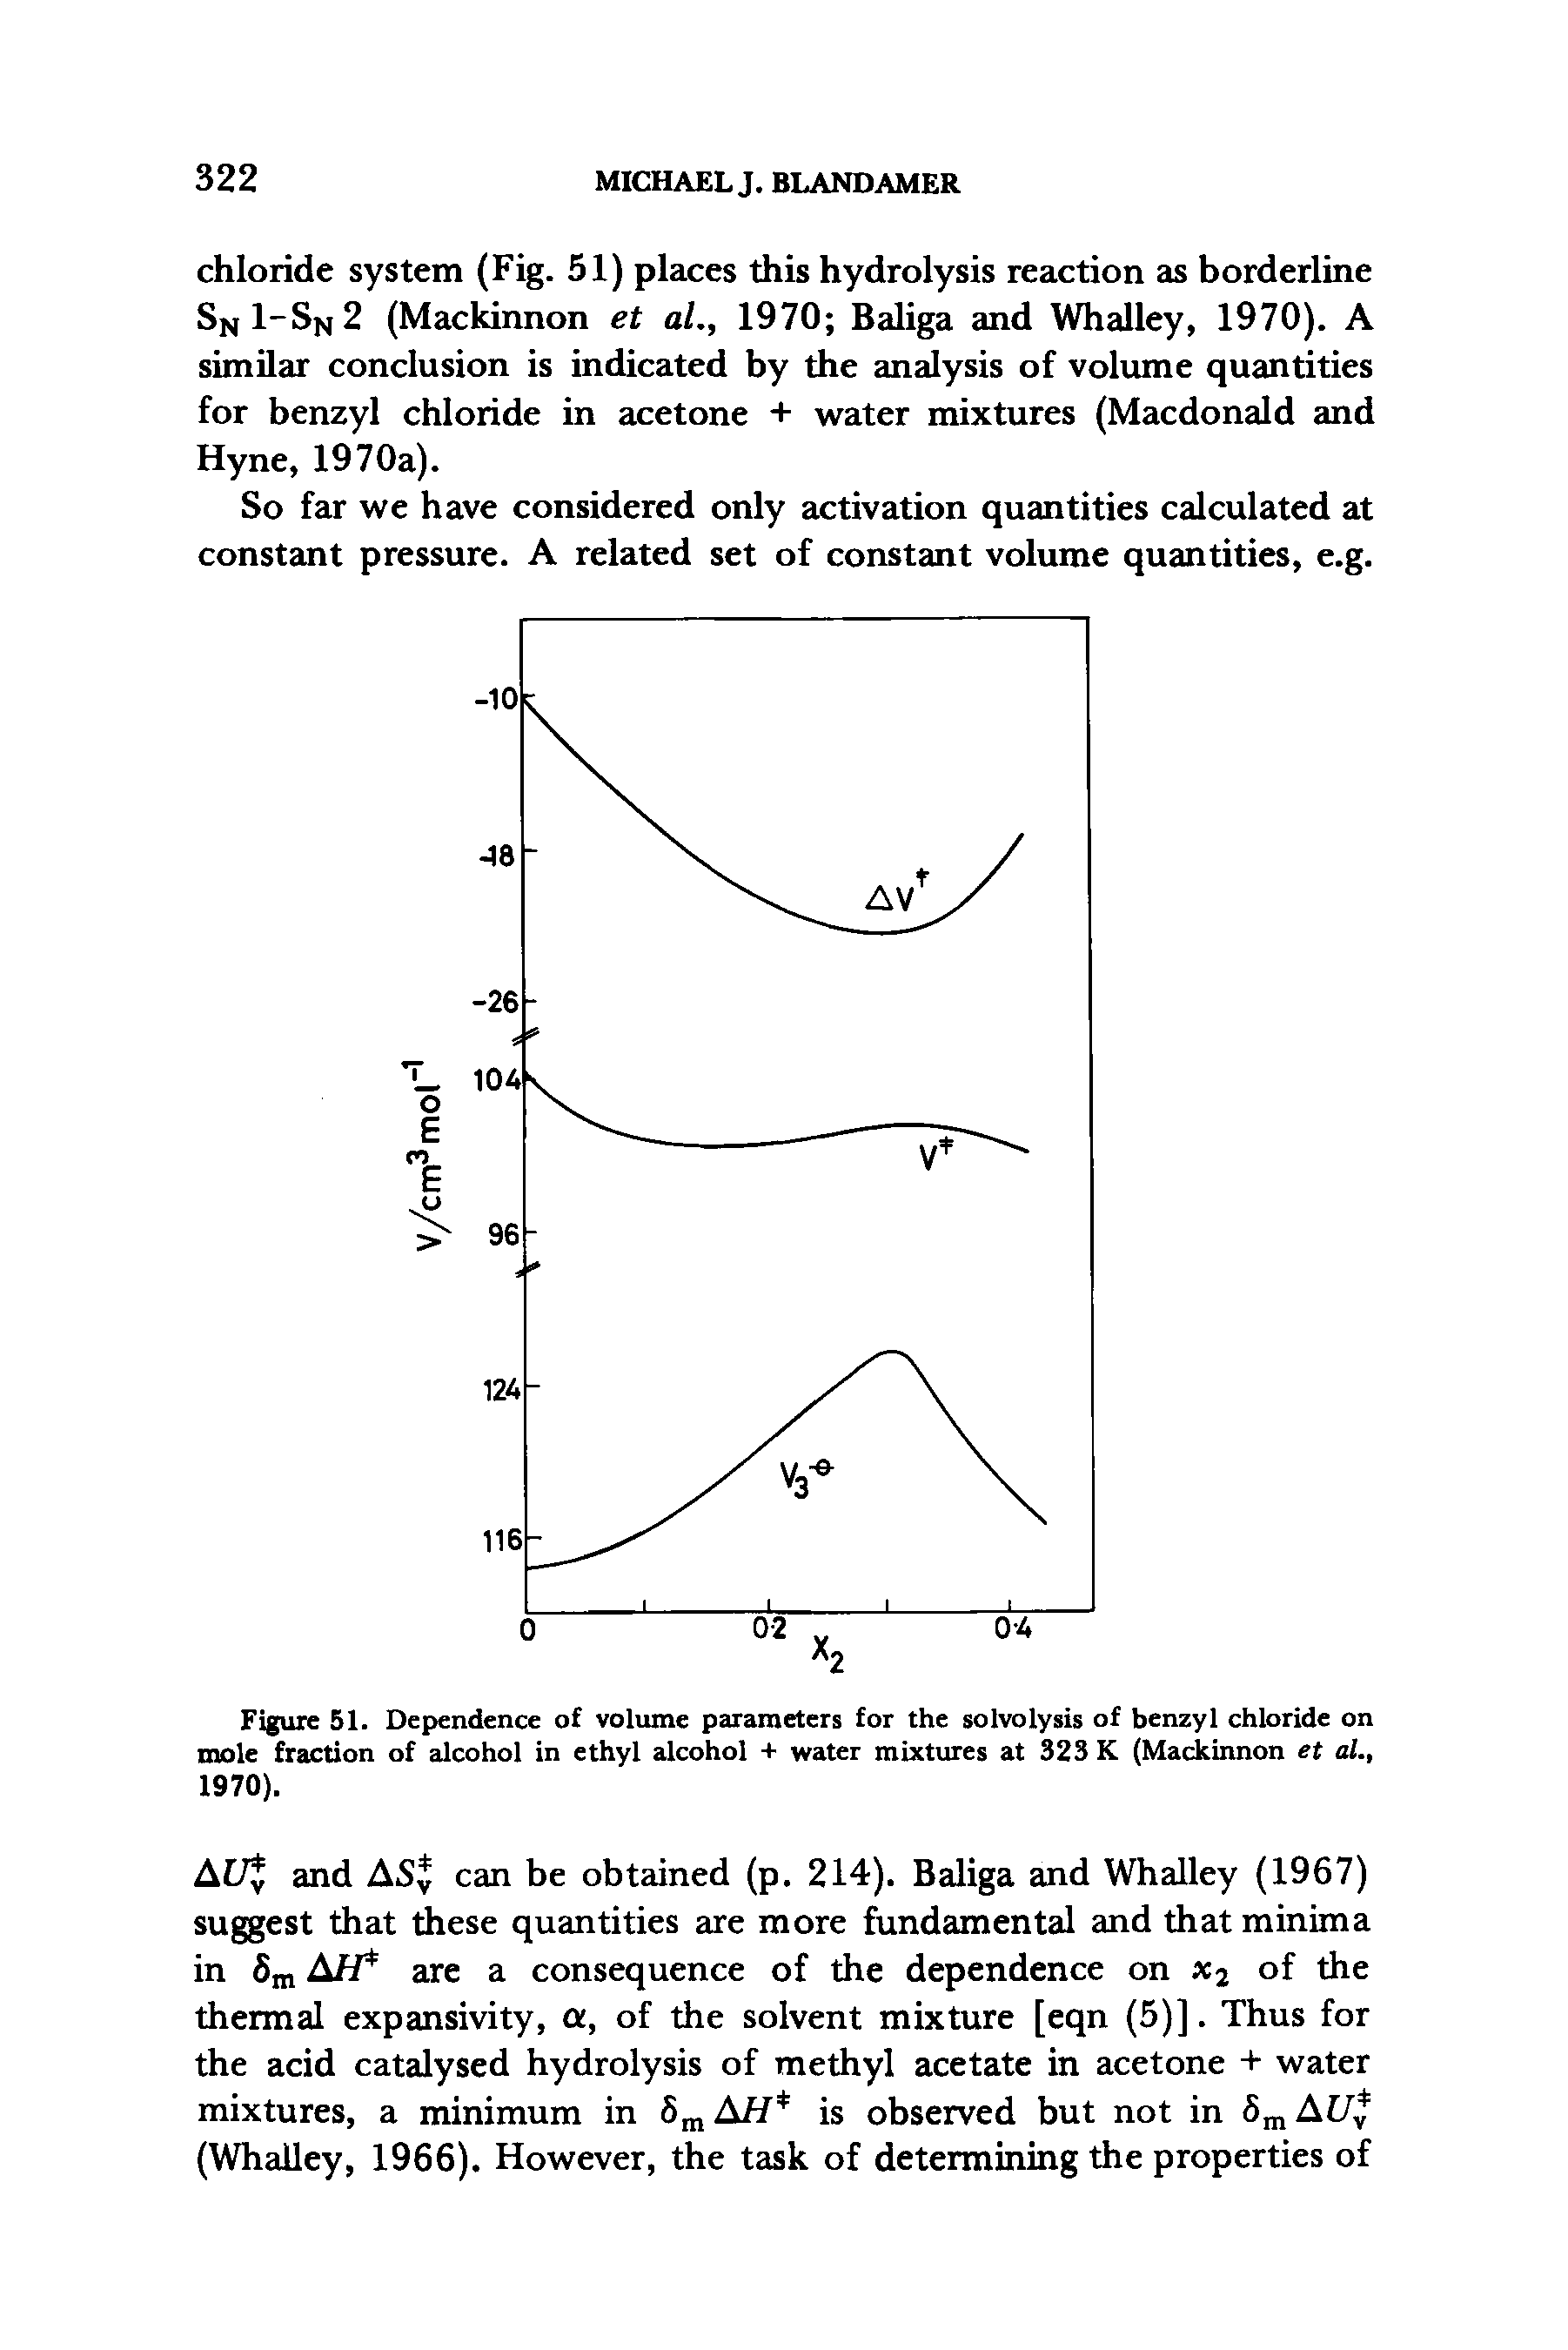 Figure 51. Dependence of volume parameters for the solvolysis of benzyl chloride on mole fraction of alcohol in ethyl alcohol + water mixtures at 323 K (Mackinnon et al., 1970).